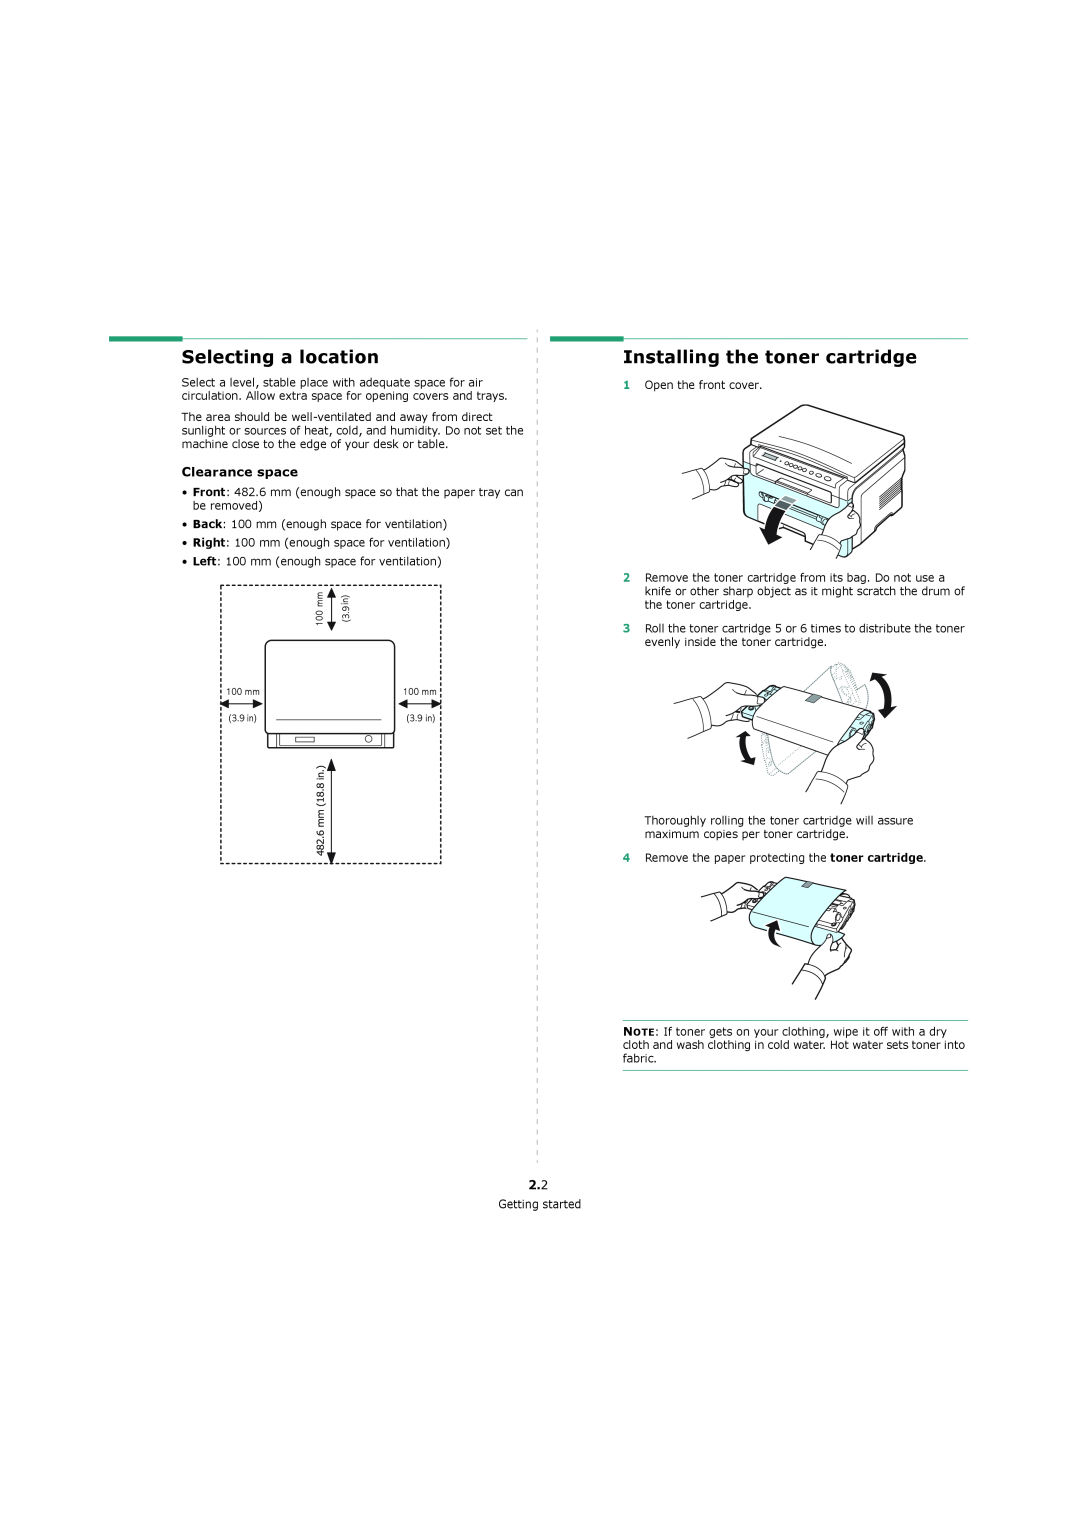 Xerox 3119 manual Selecting a location, Installing the toner cartridge, Clearance space 